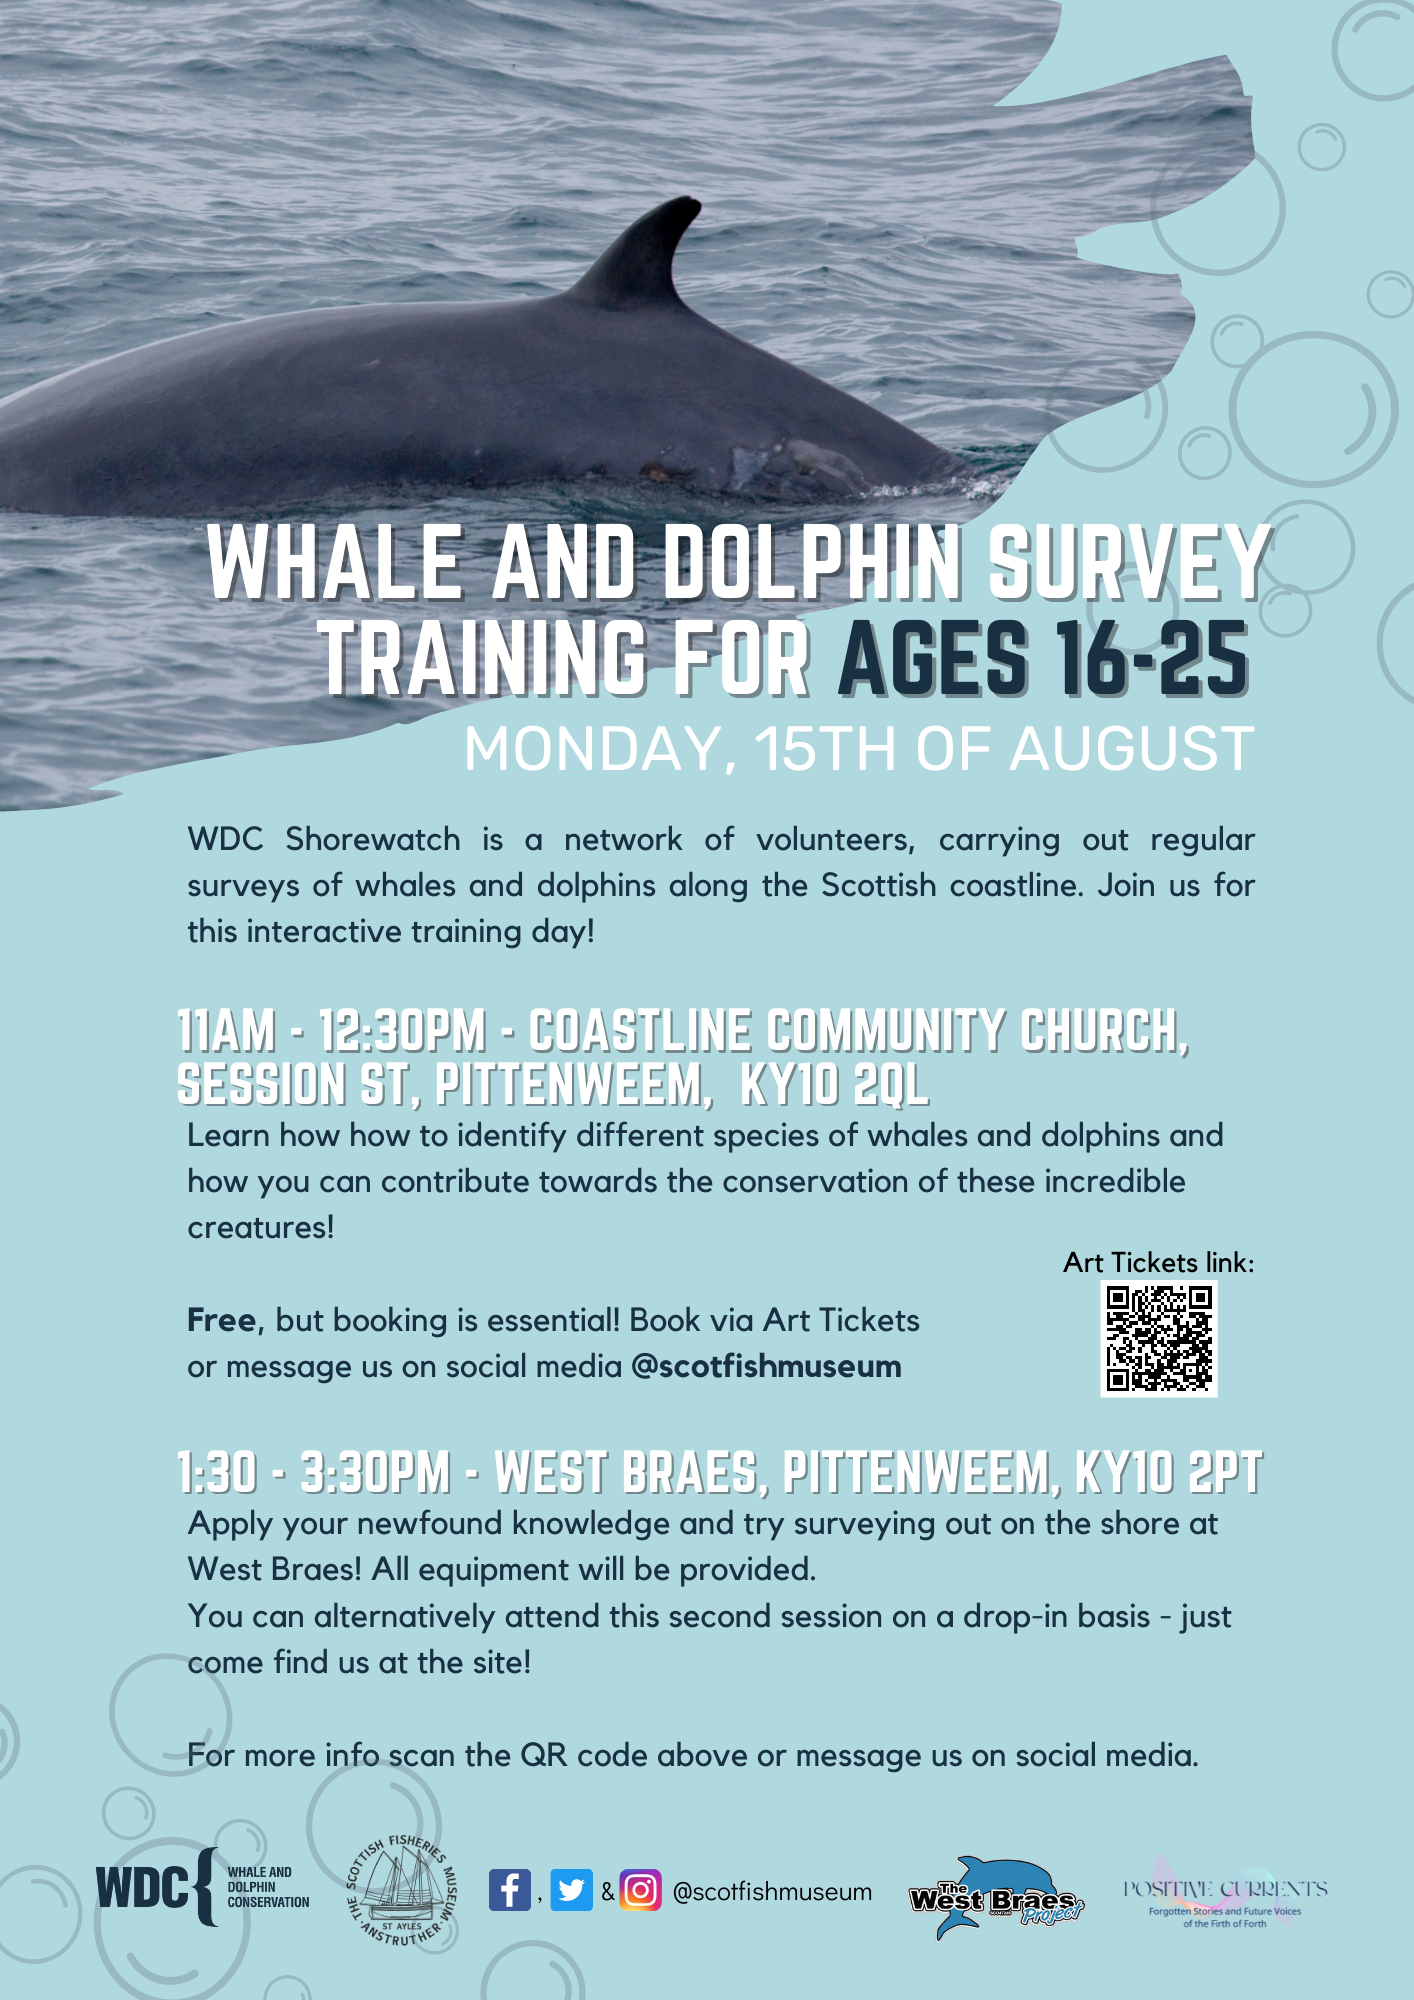 Whale and Dolphin Survey Training for Ages 16-25 with WDC Shorewatch